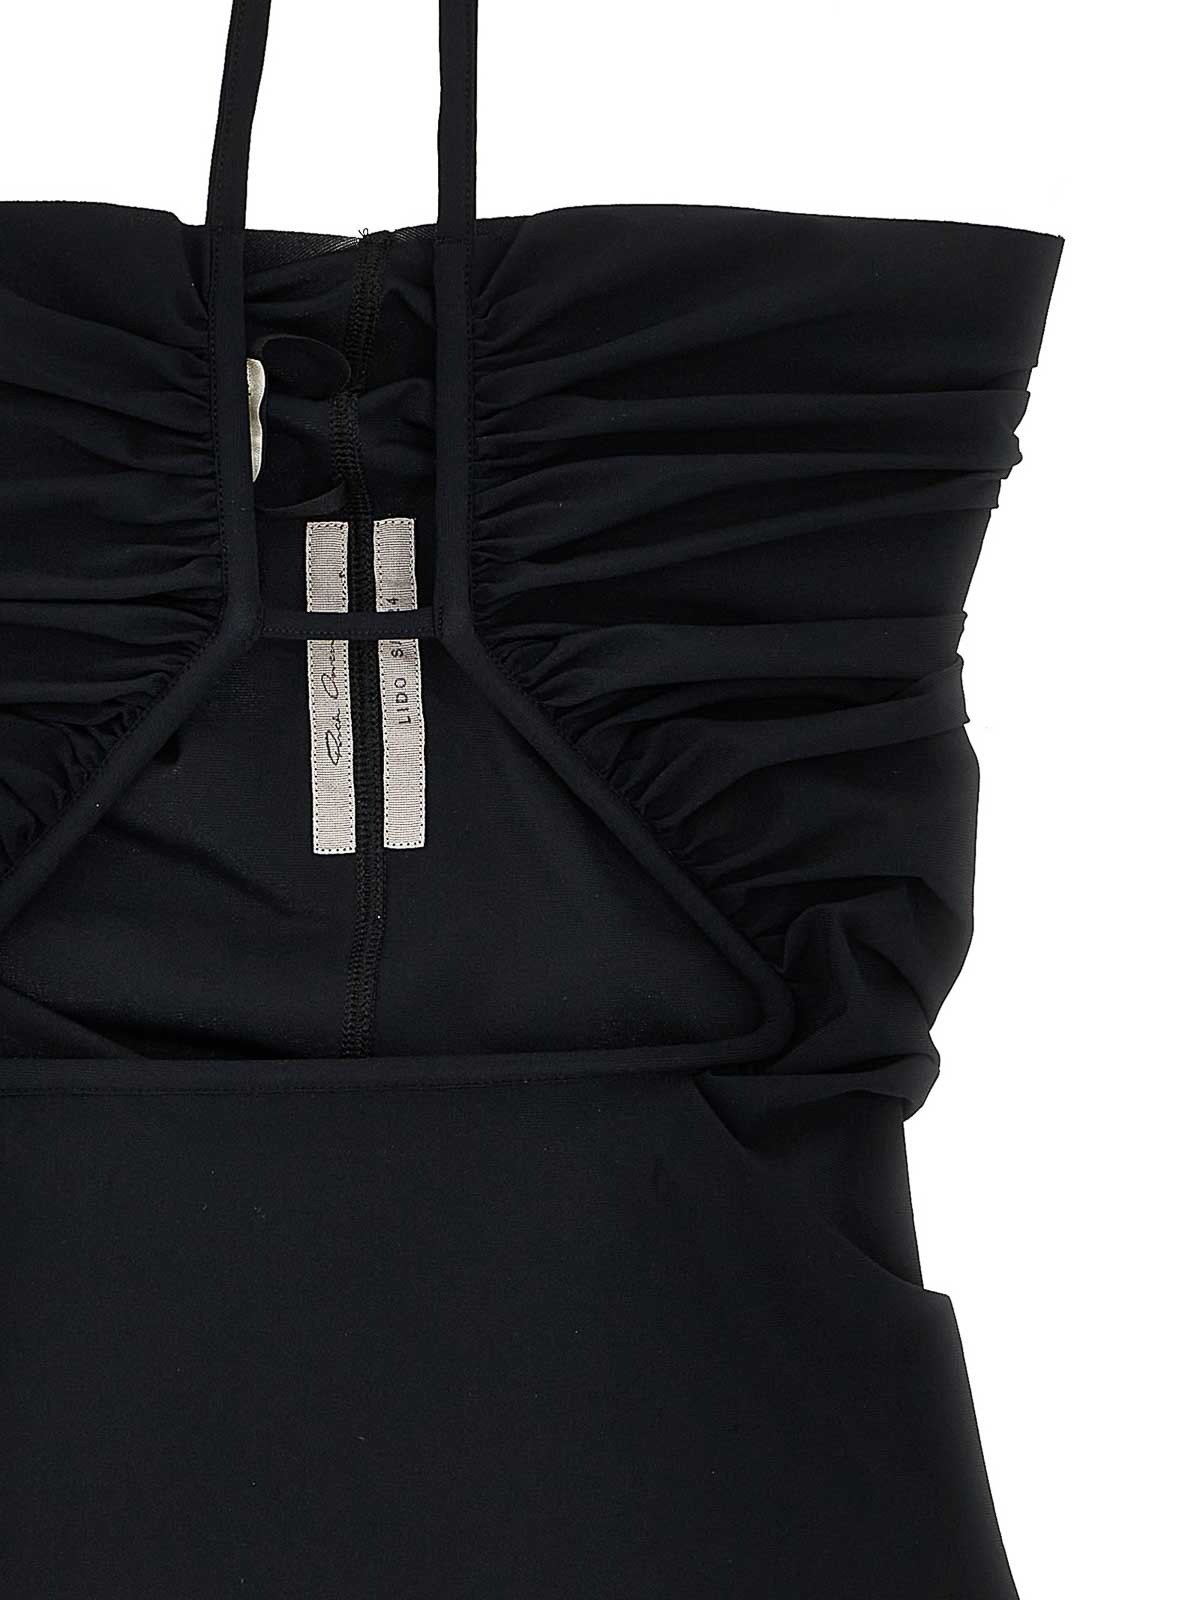 Shop Rick Owens Prong Bather One-piece Swimsuit In Black